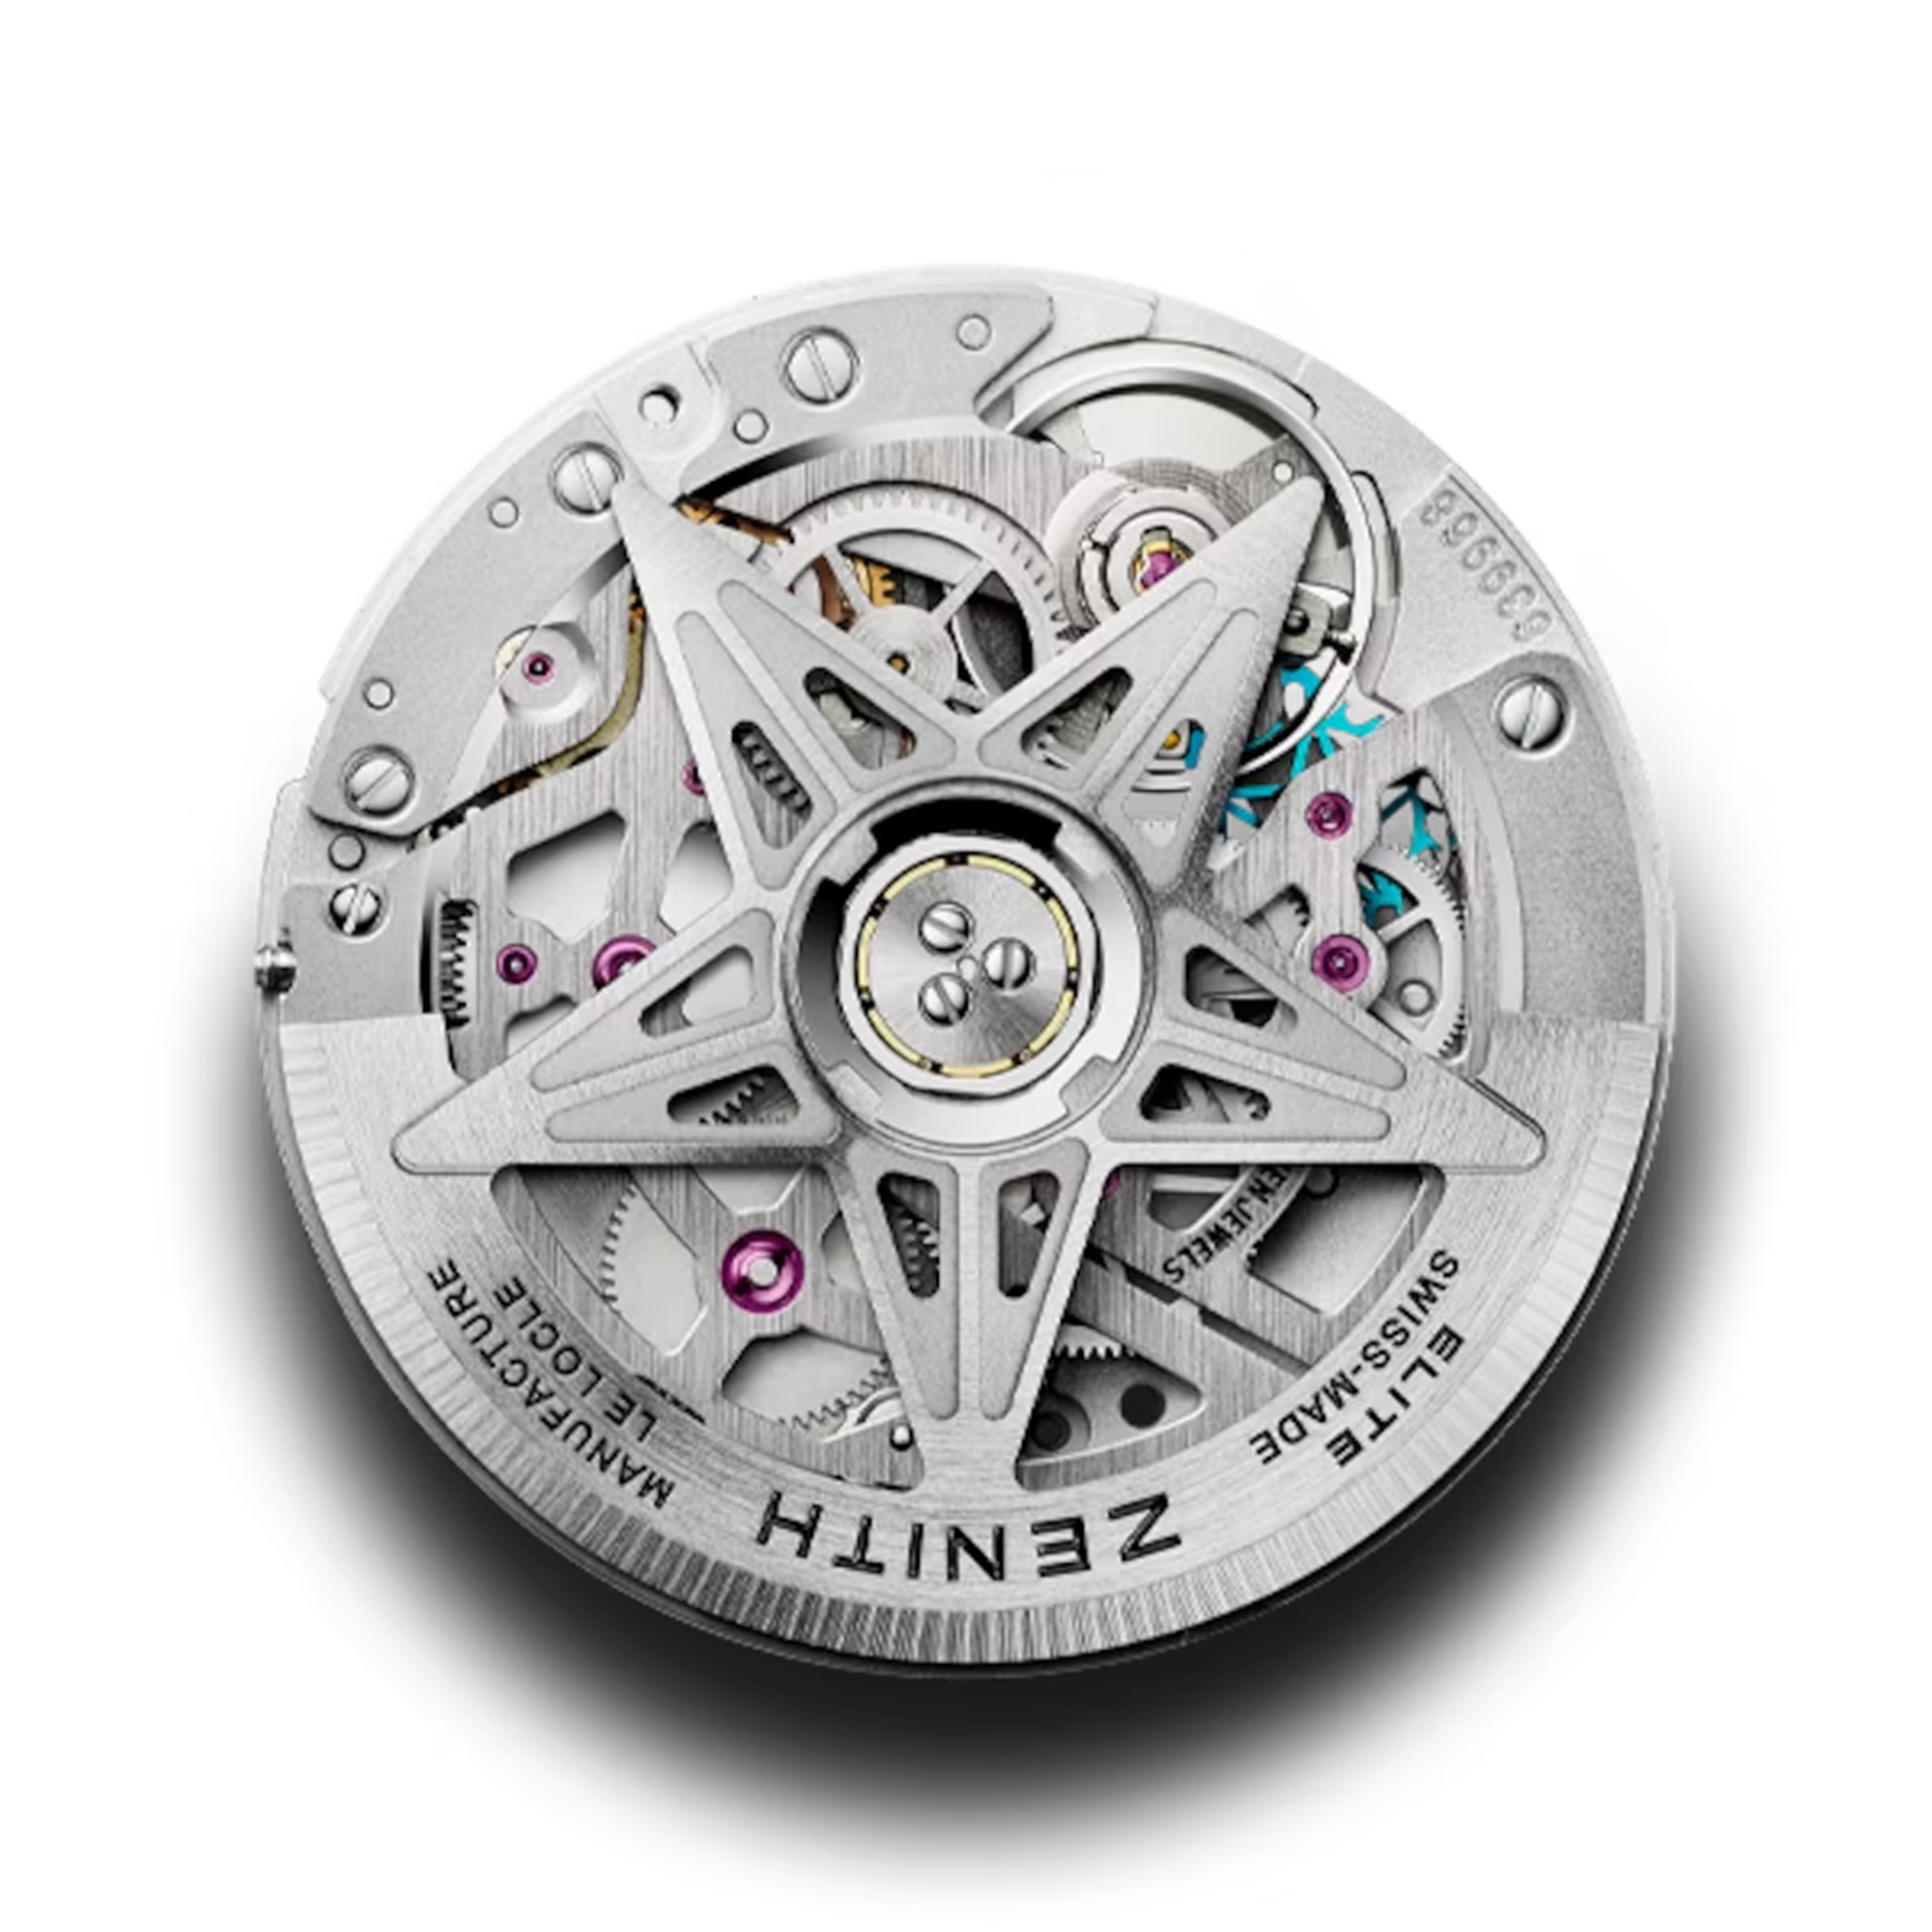 Zenith Re-Release the First Coloured Defy with the Revival A3691